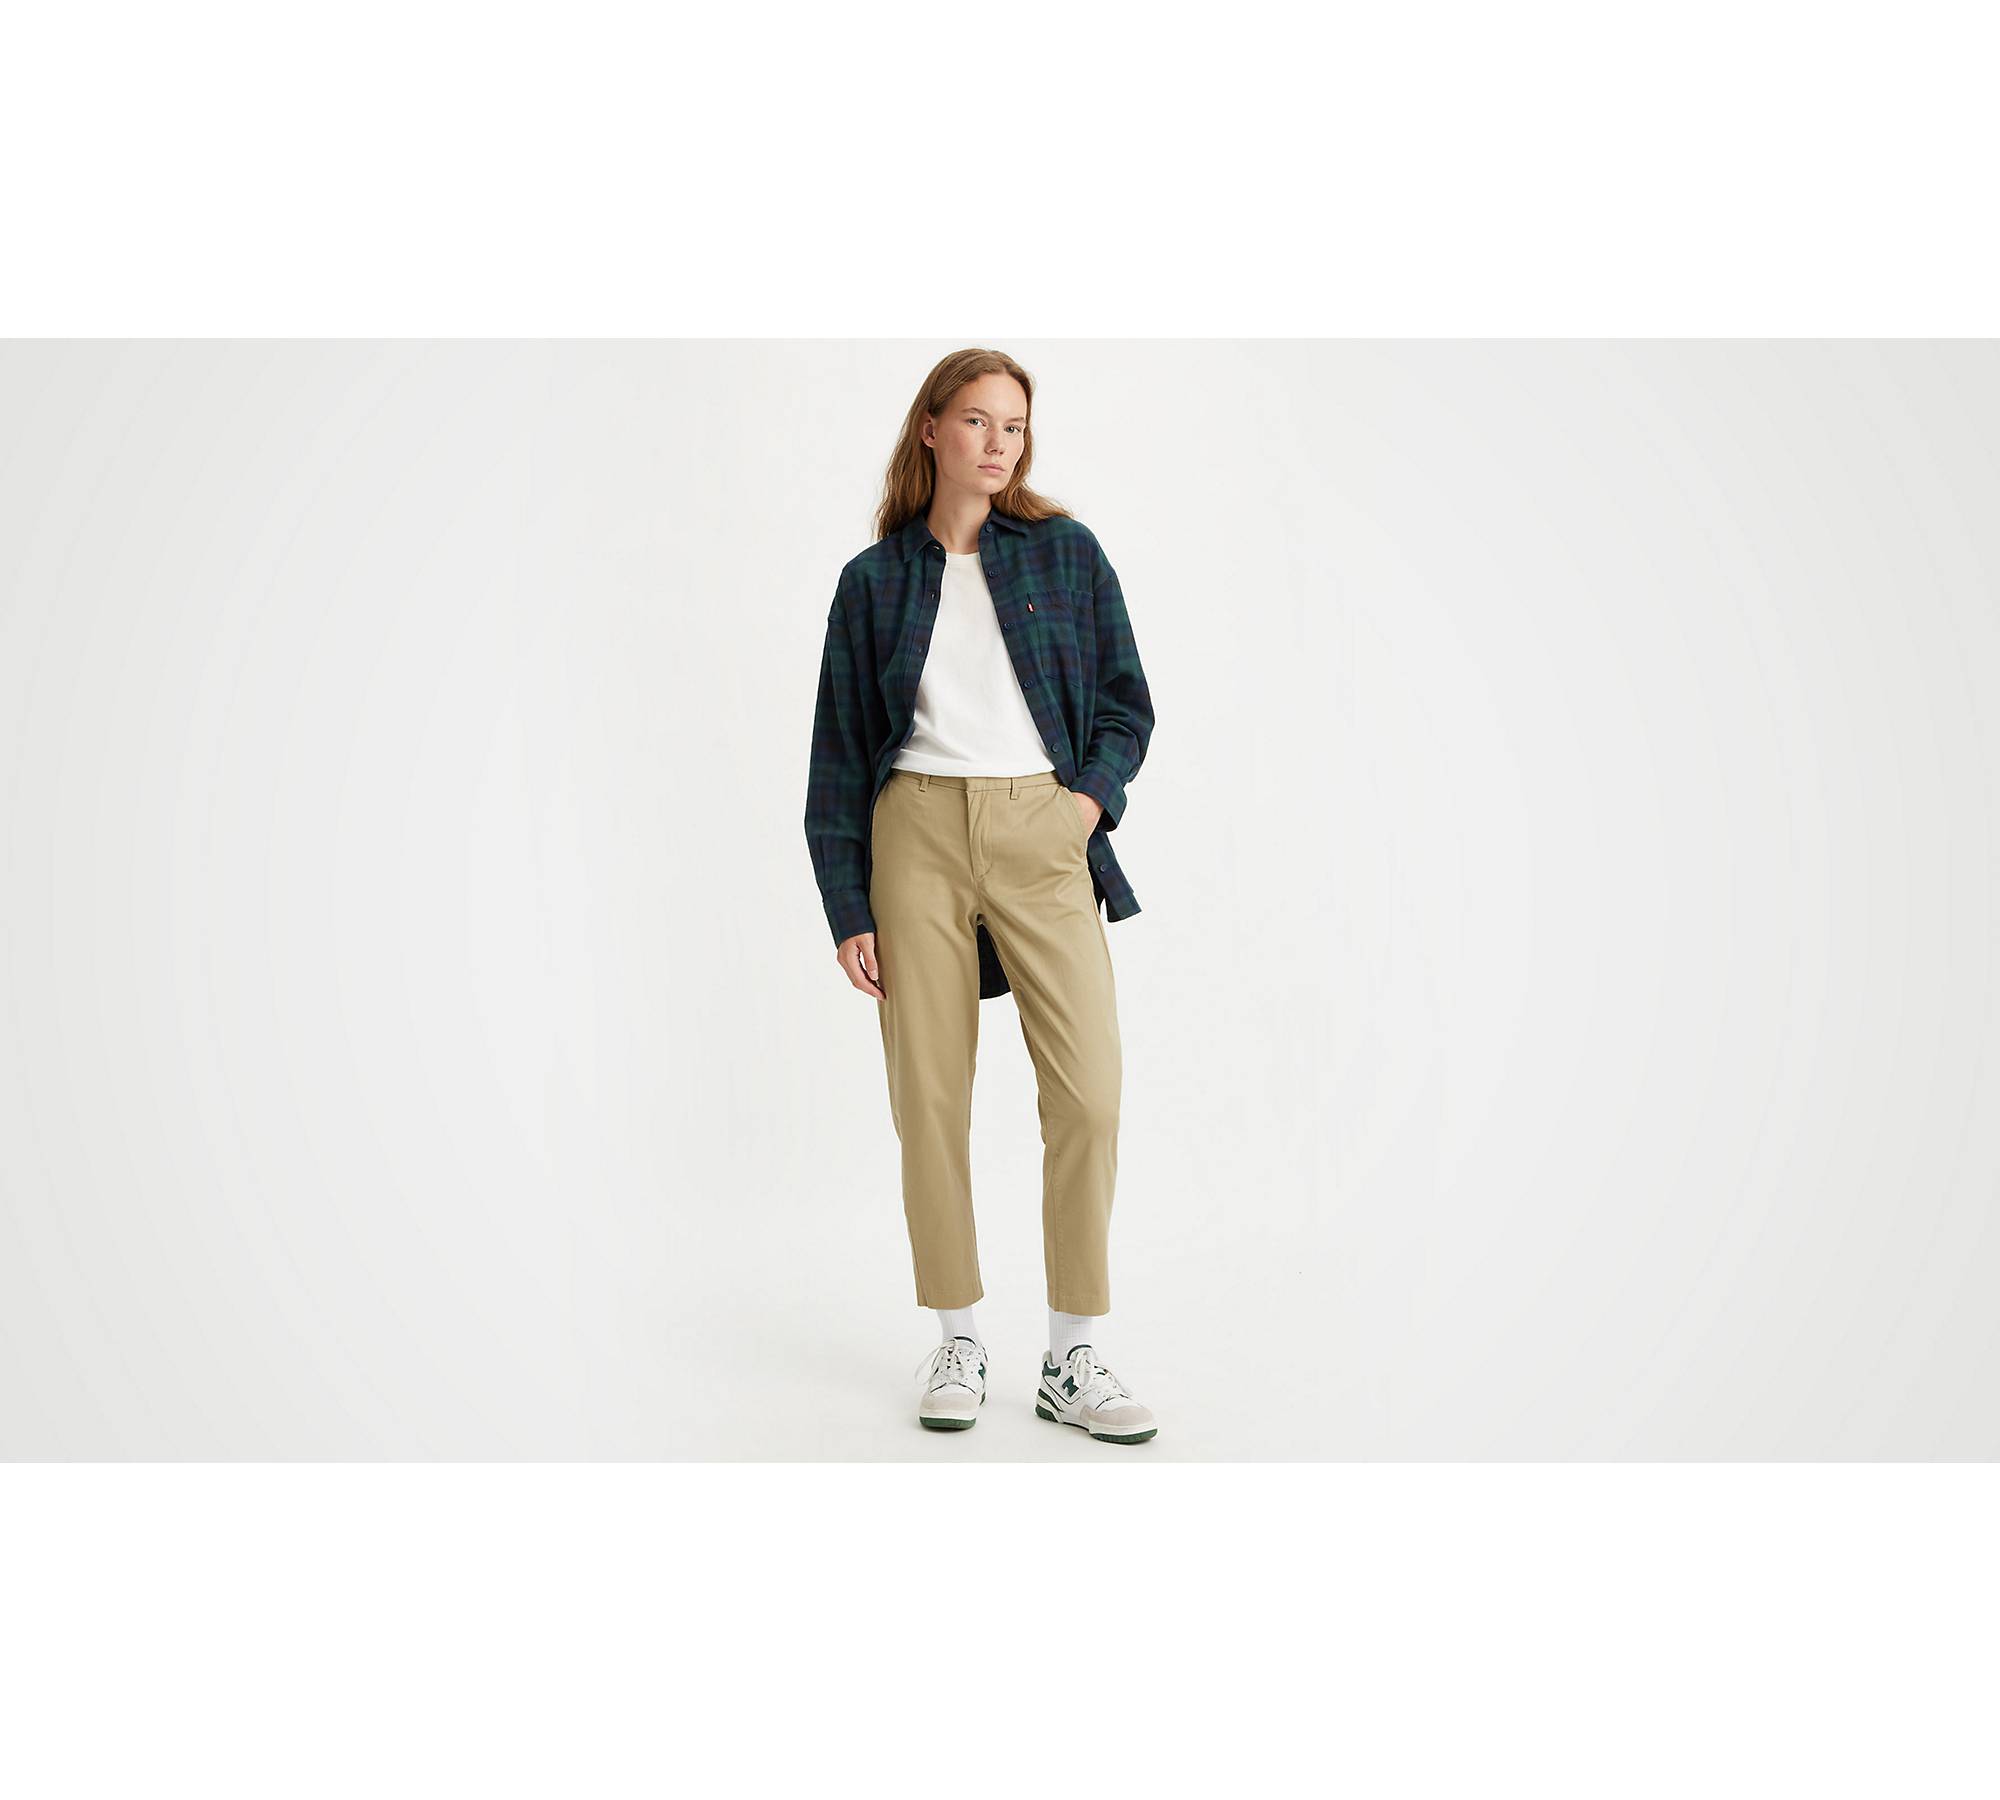 UNIQLO Ezy Ankle Pants  Ankle pants, Gym shorts womens, Ankle